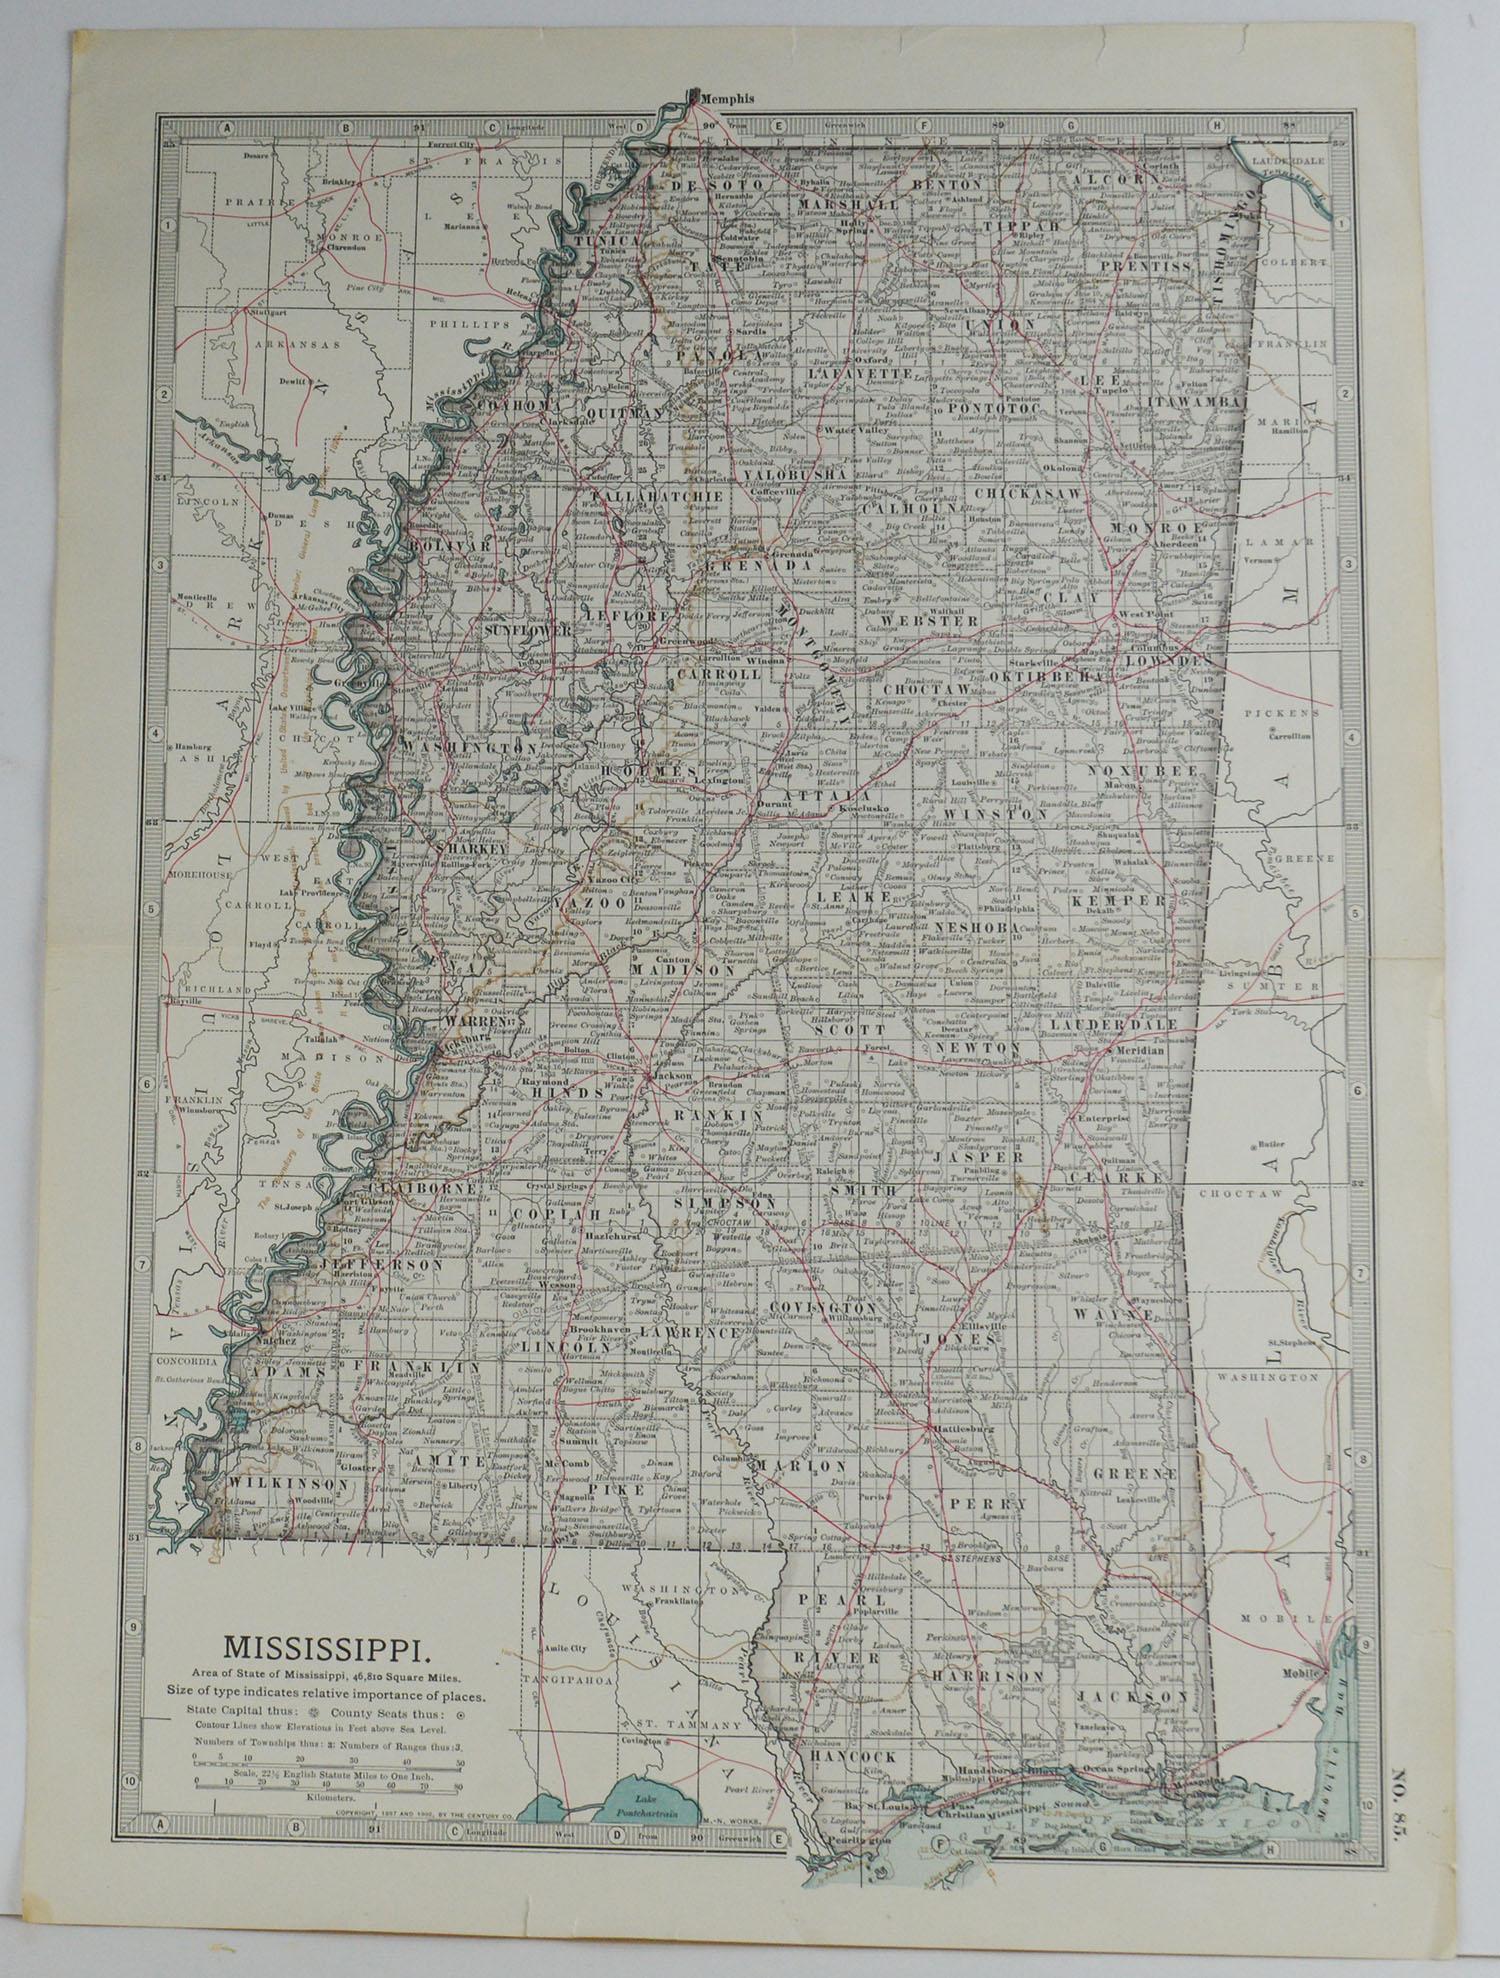 Great map of Mississippi

Original color.

Published, circa 1890

A few minor edge tears

Unframed.
 